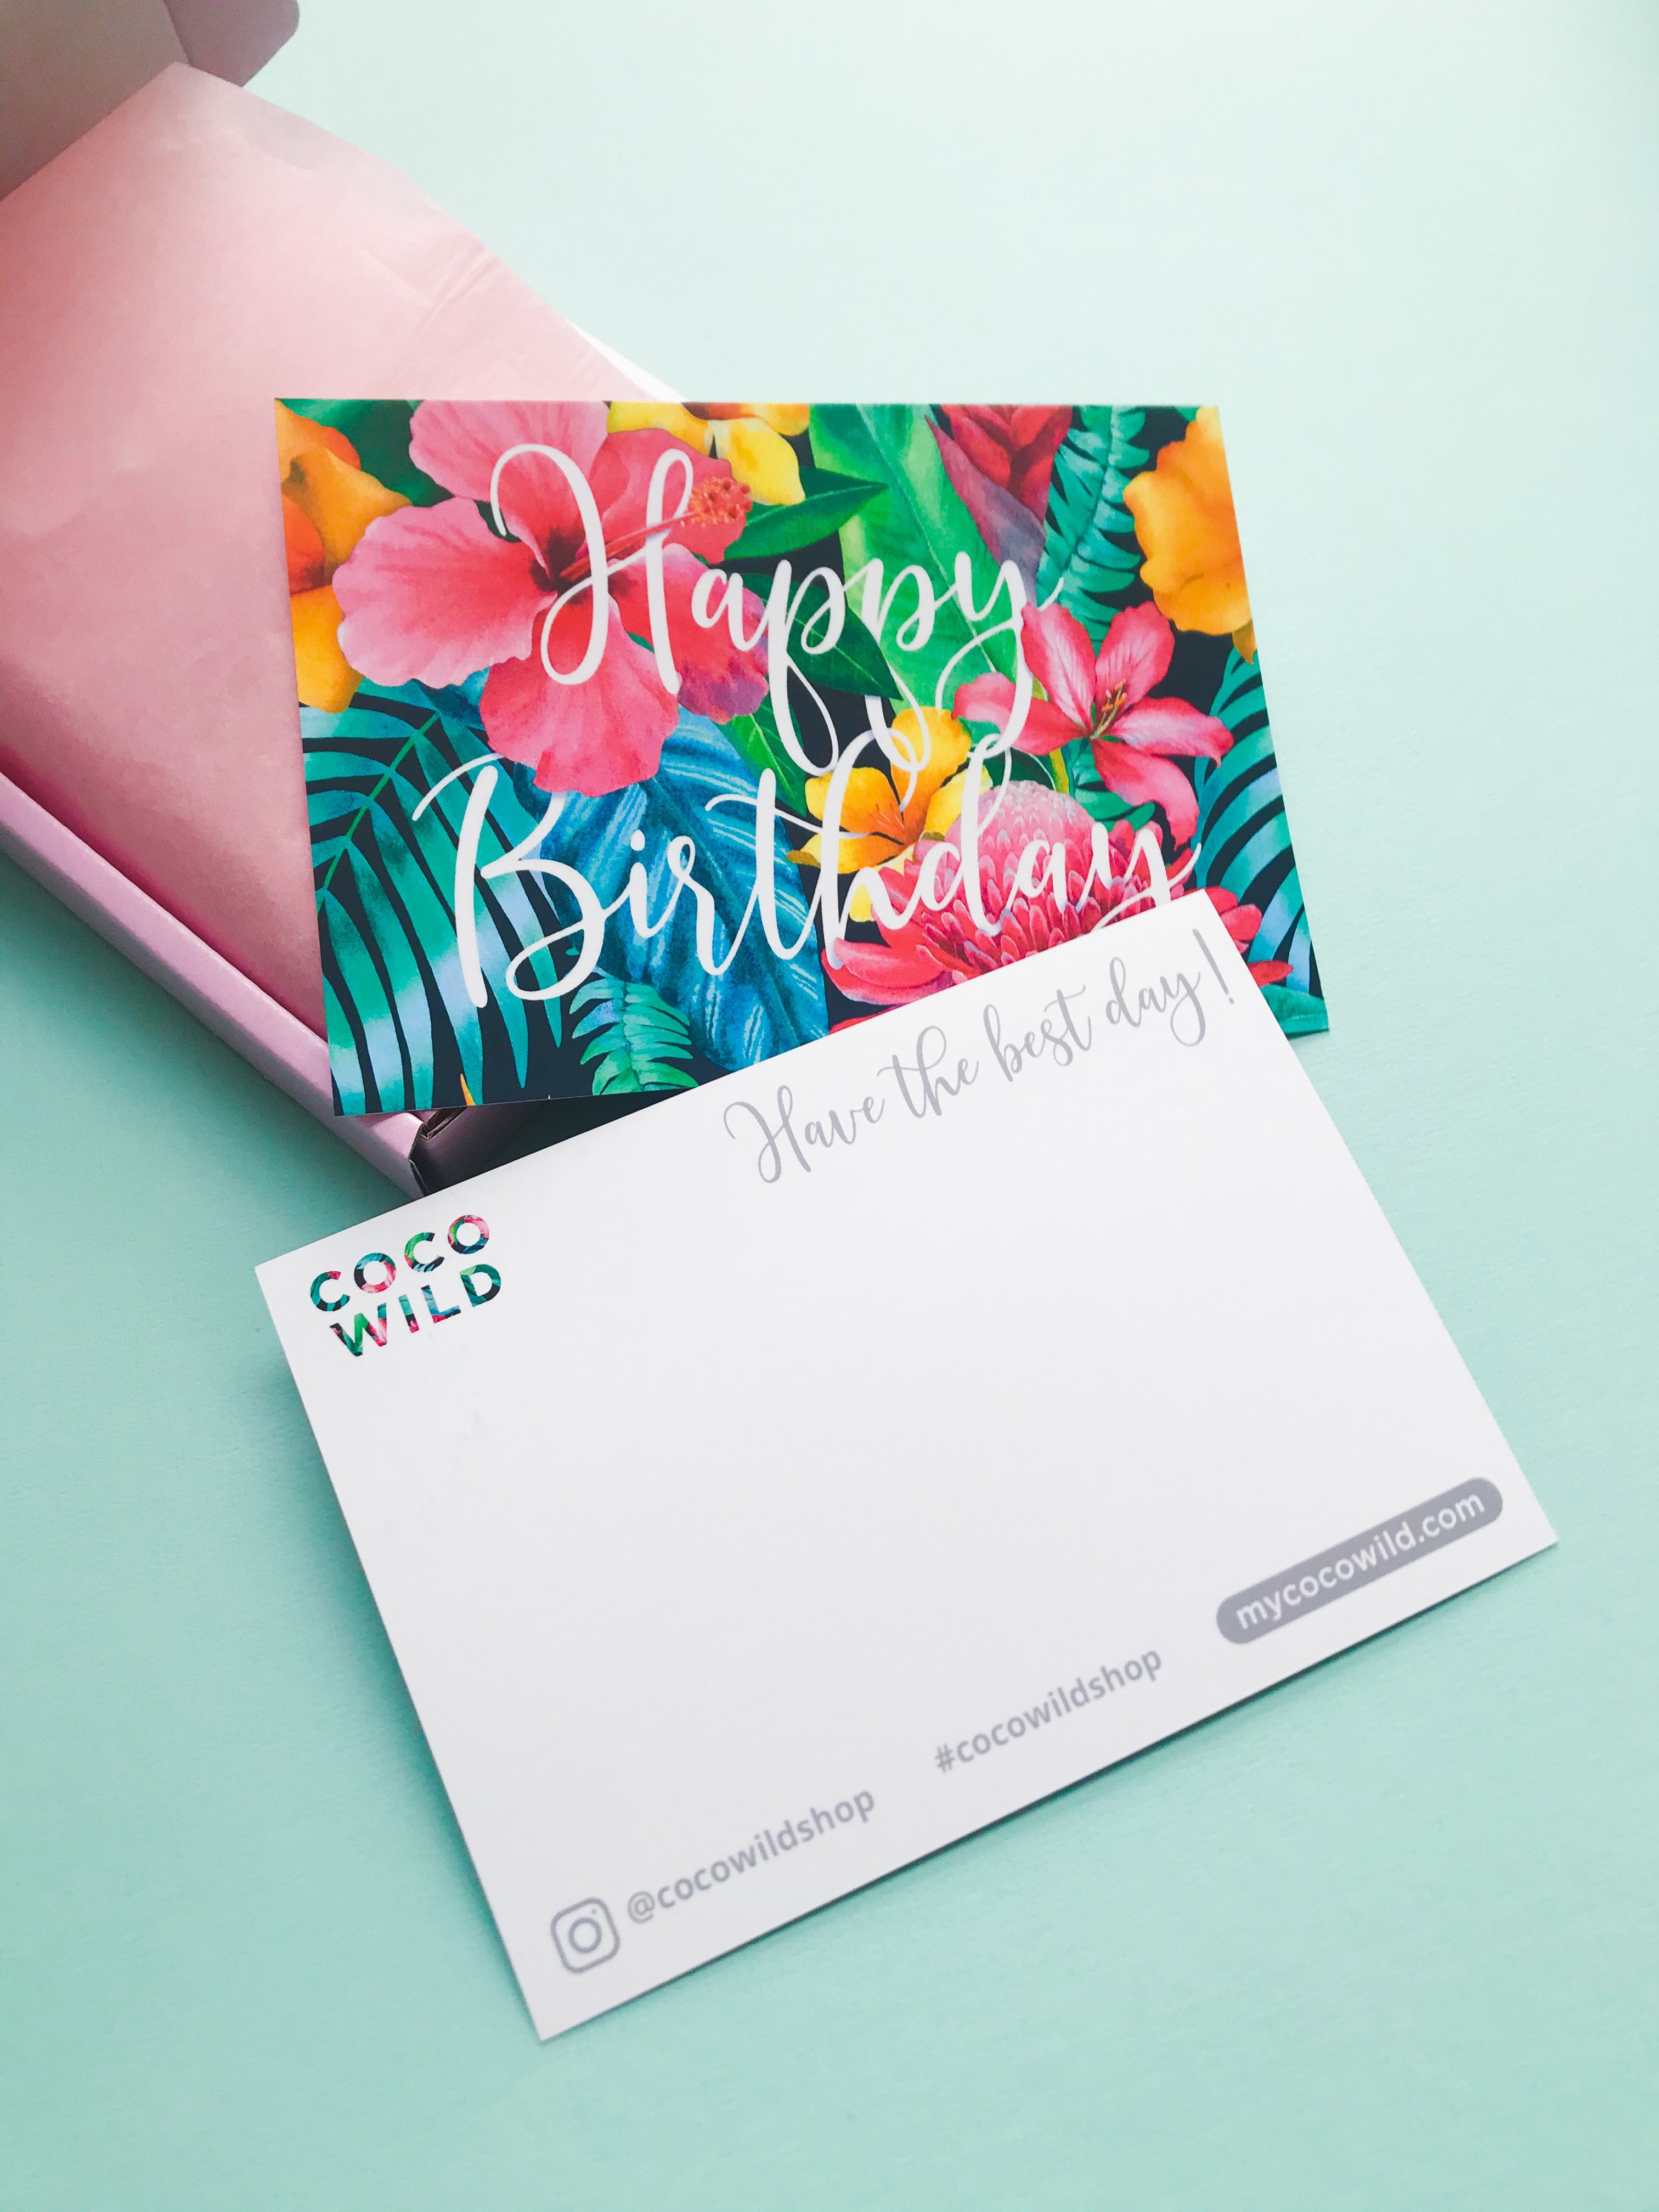 1. FREE HANDWRITTEN PERSONALISED MESSAGE - COCOWILD